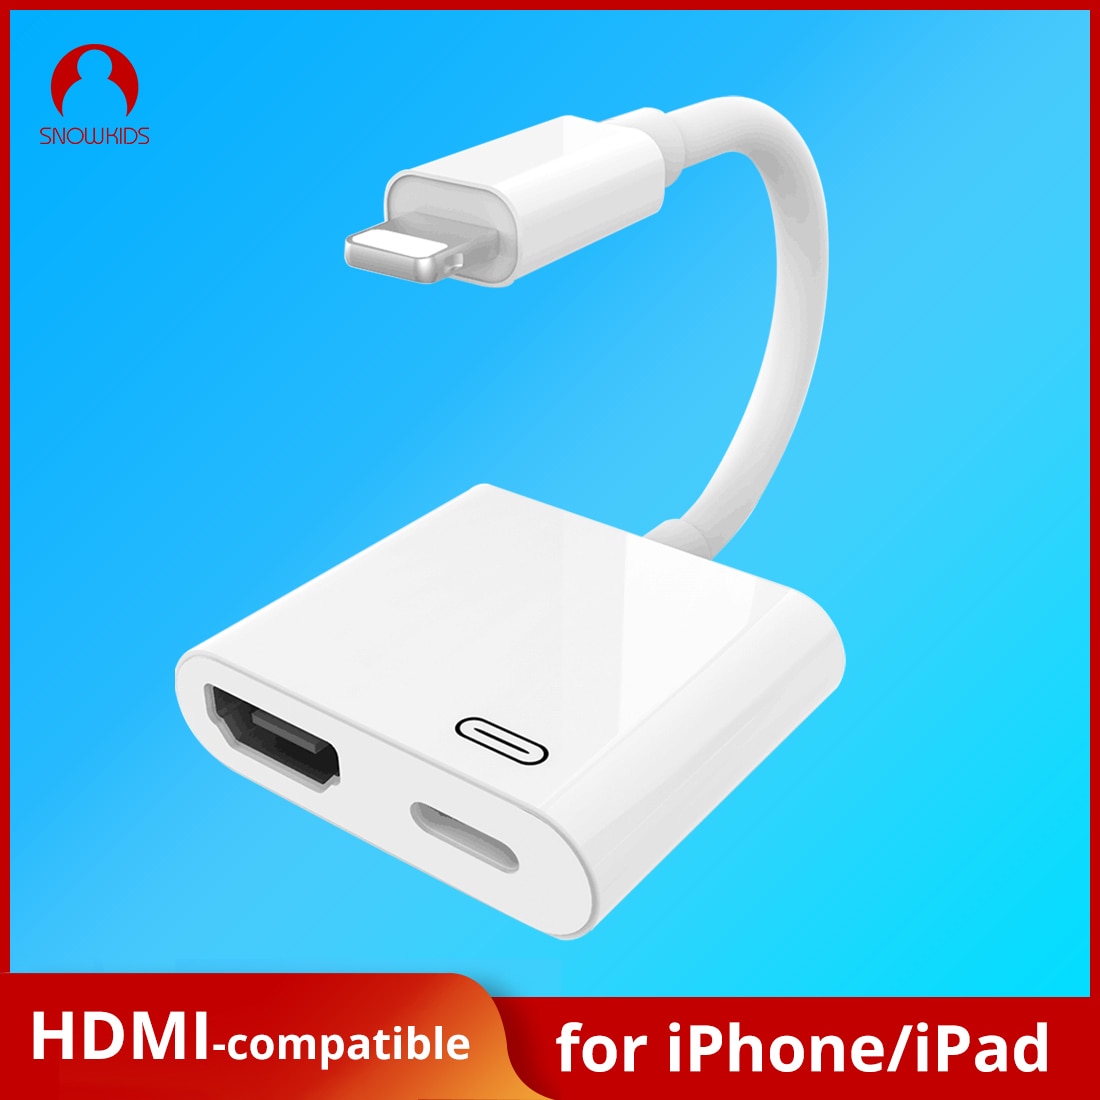 Snowkids Phone HDMI-compatible Adapter for Ligtning to HDMI-compatible Adapter 4K  iphone hdmi-compatible adapter hdmi extender